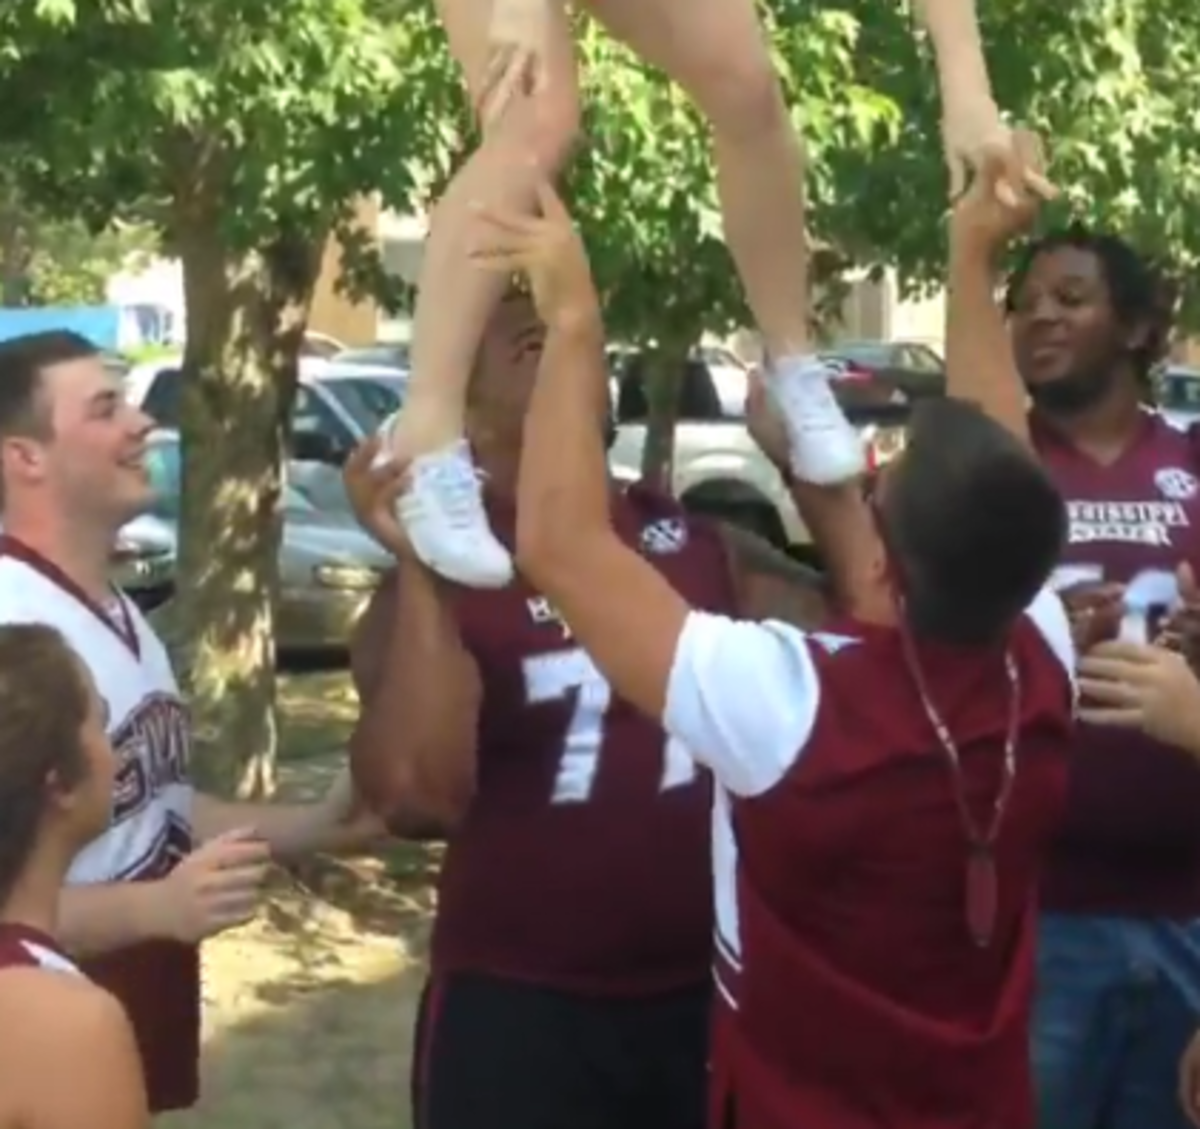 Mississippi State Offensive lineman attempts to hold an MS cheerleader.